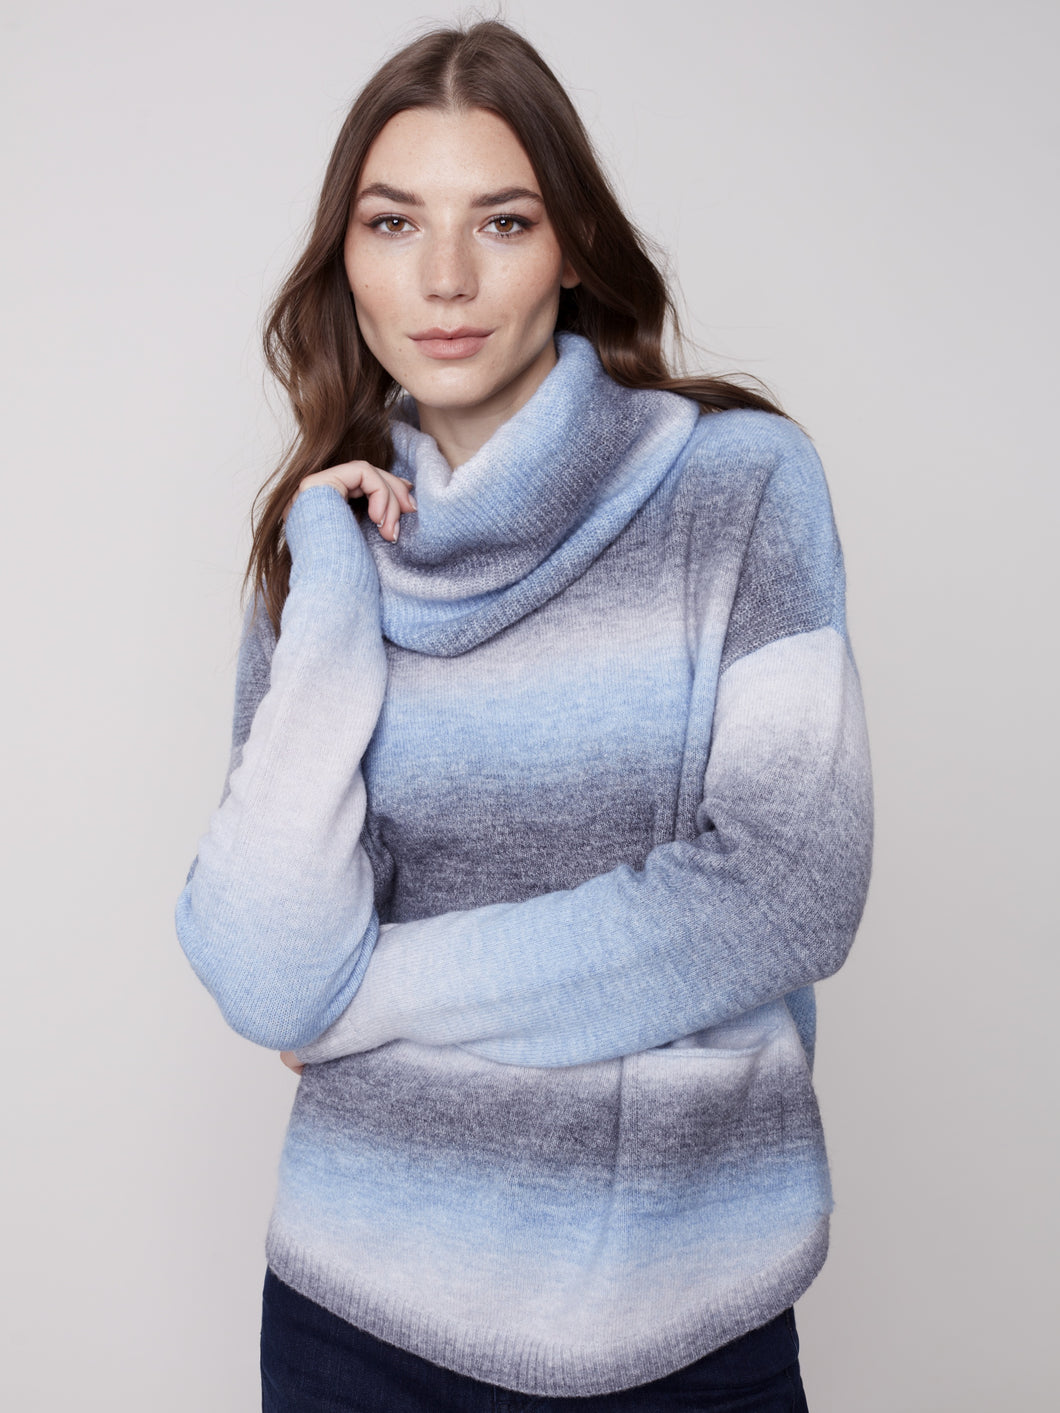 Denim Ombre Sweater With Removable Scarf